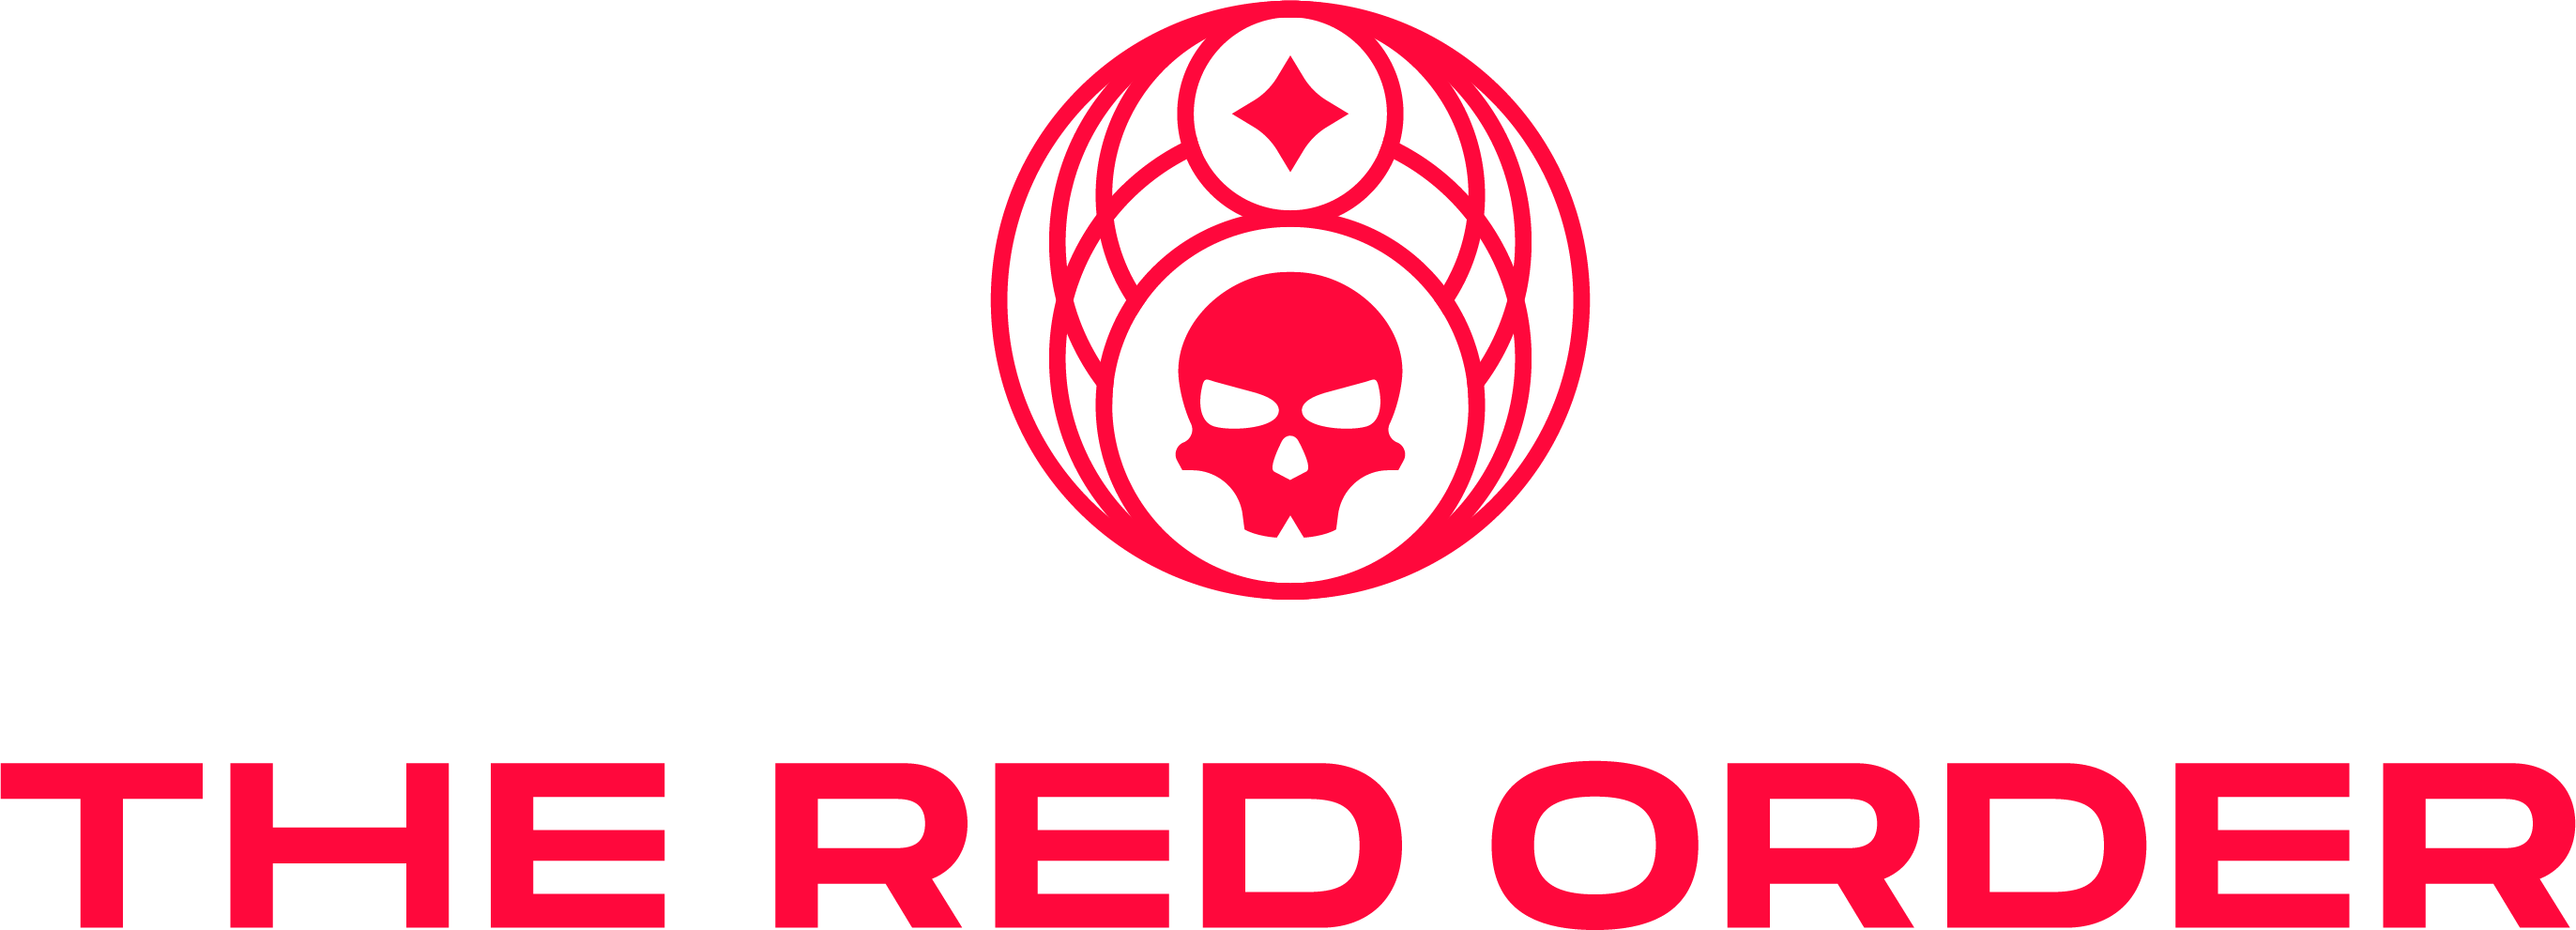 Crypto Super Villains Launch ‘The Red Order’ and $ORDR Token to Rival Deceptive Meme Coins